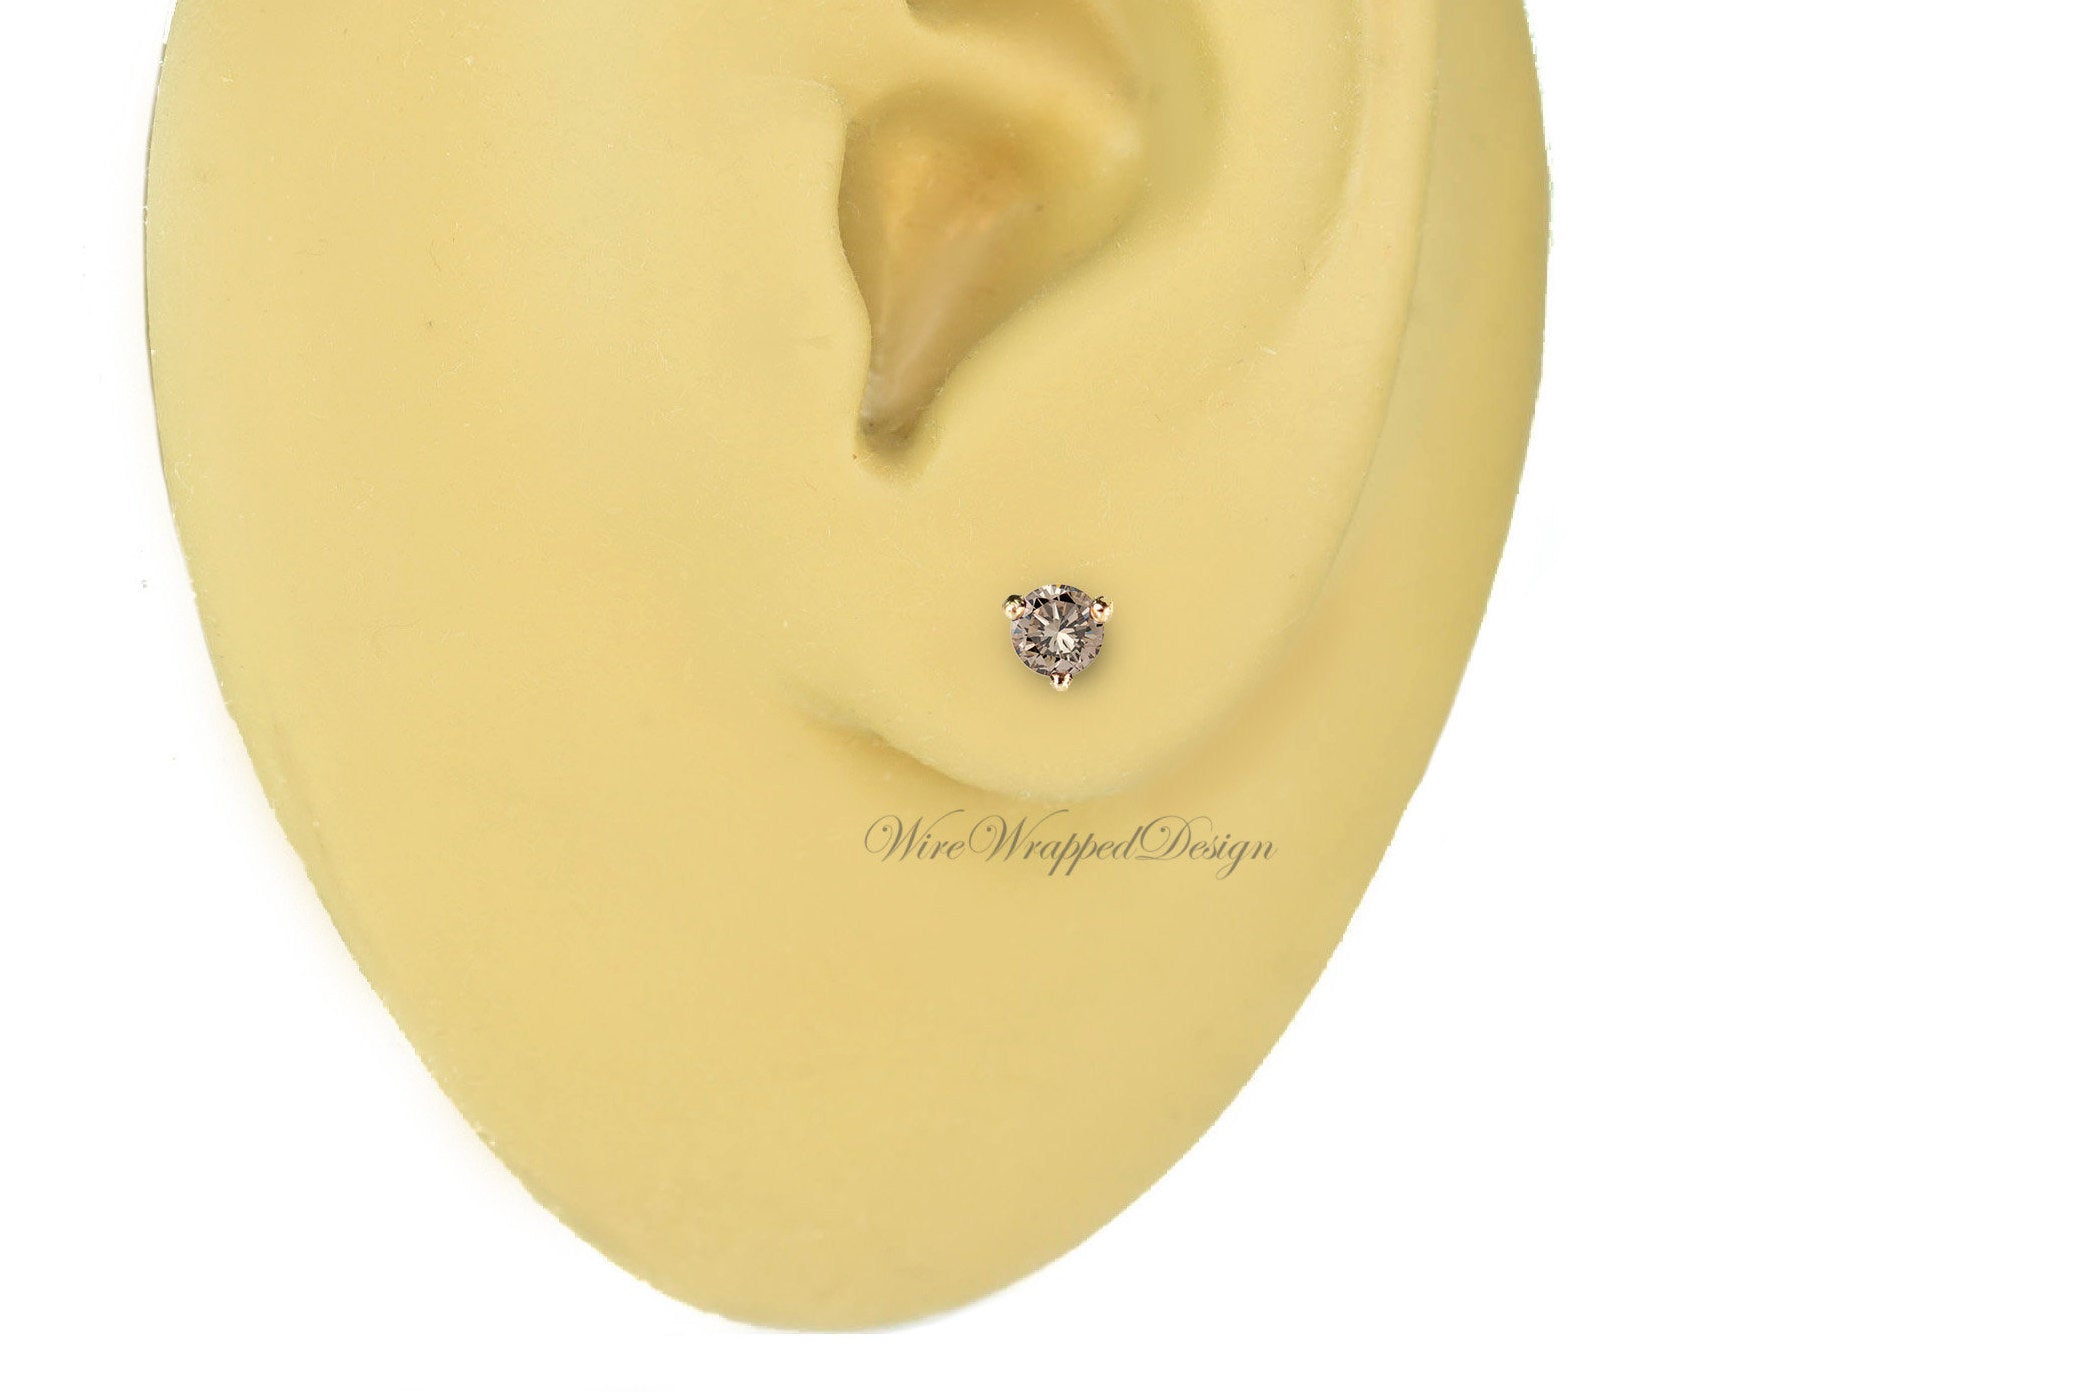 PAIR Genuine CHAMPAGNE DIAMOND Earrings Studs 3mm 0.2tcw Martini 14k Solid Gold (Yellow, Rose, White) Platinum Silver Cartilage Tragus Brown